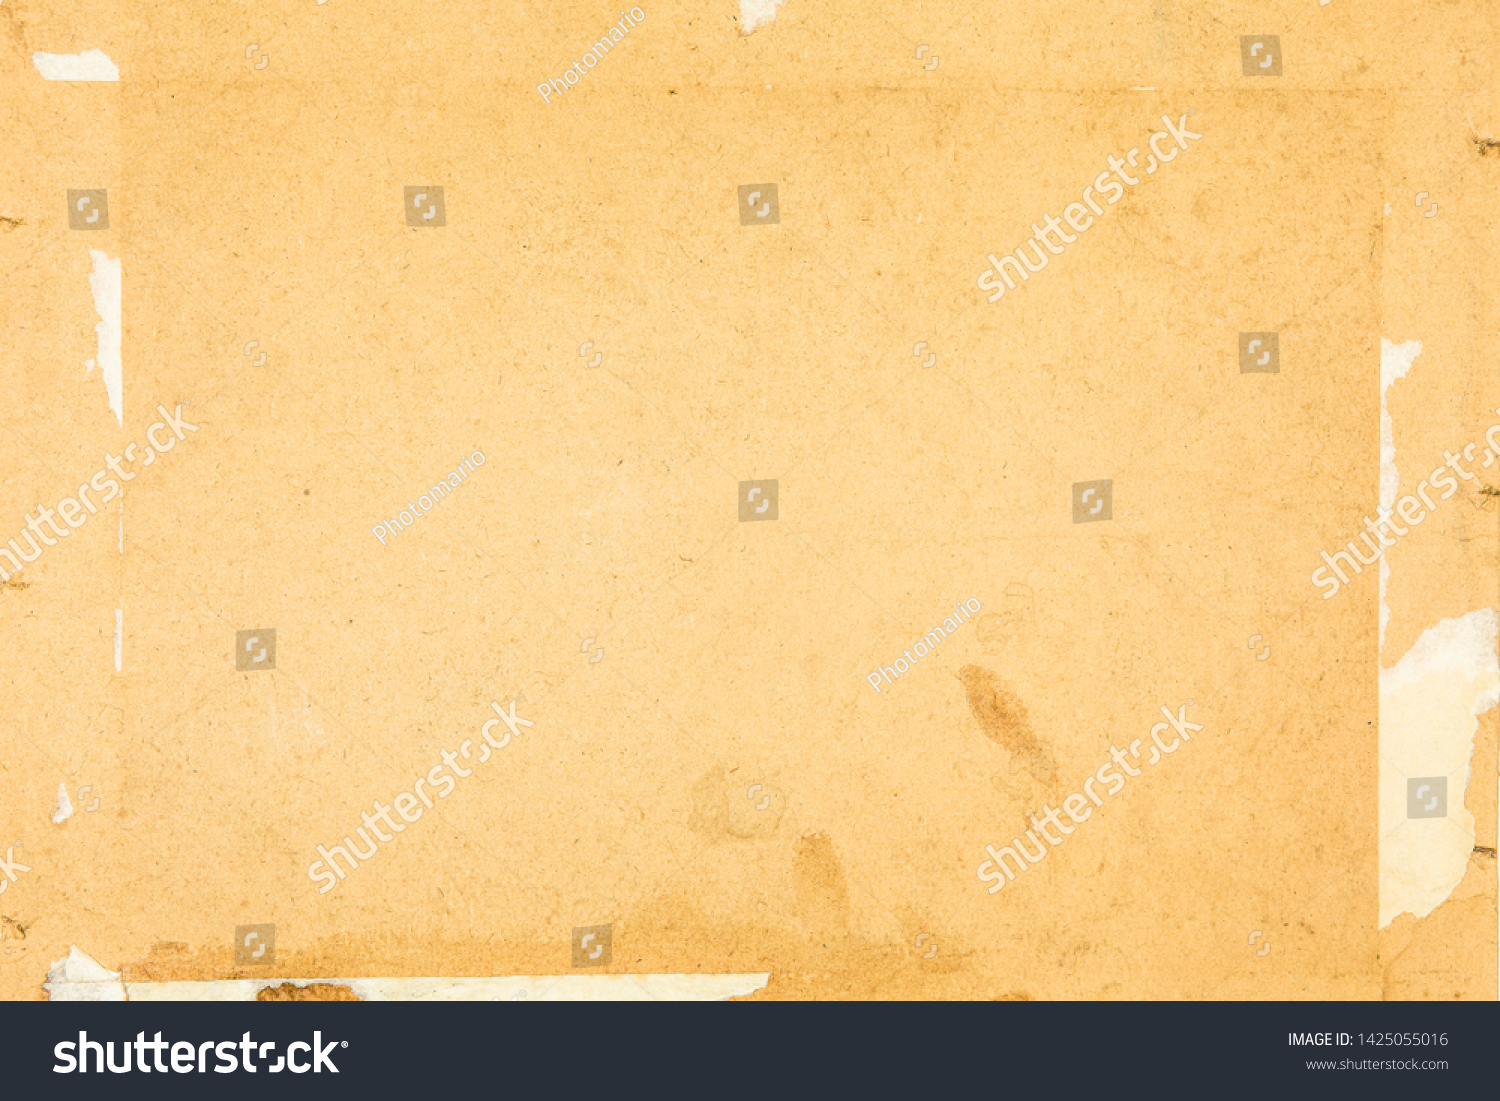 Old vintage paper background, grungy texture  #1425055016